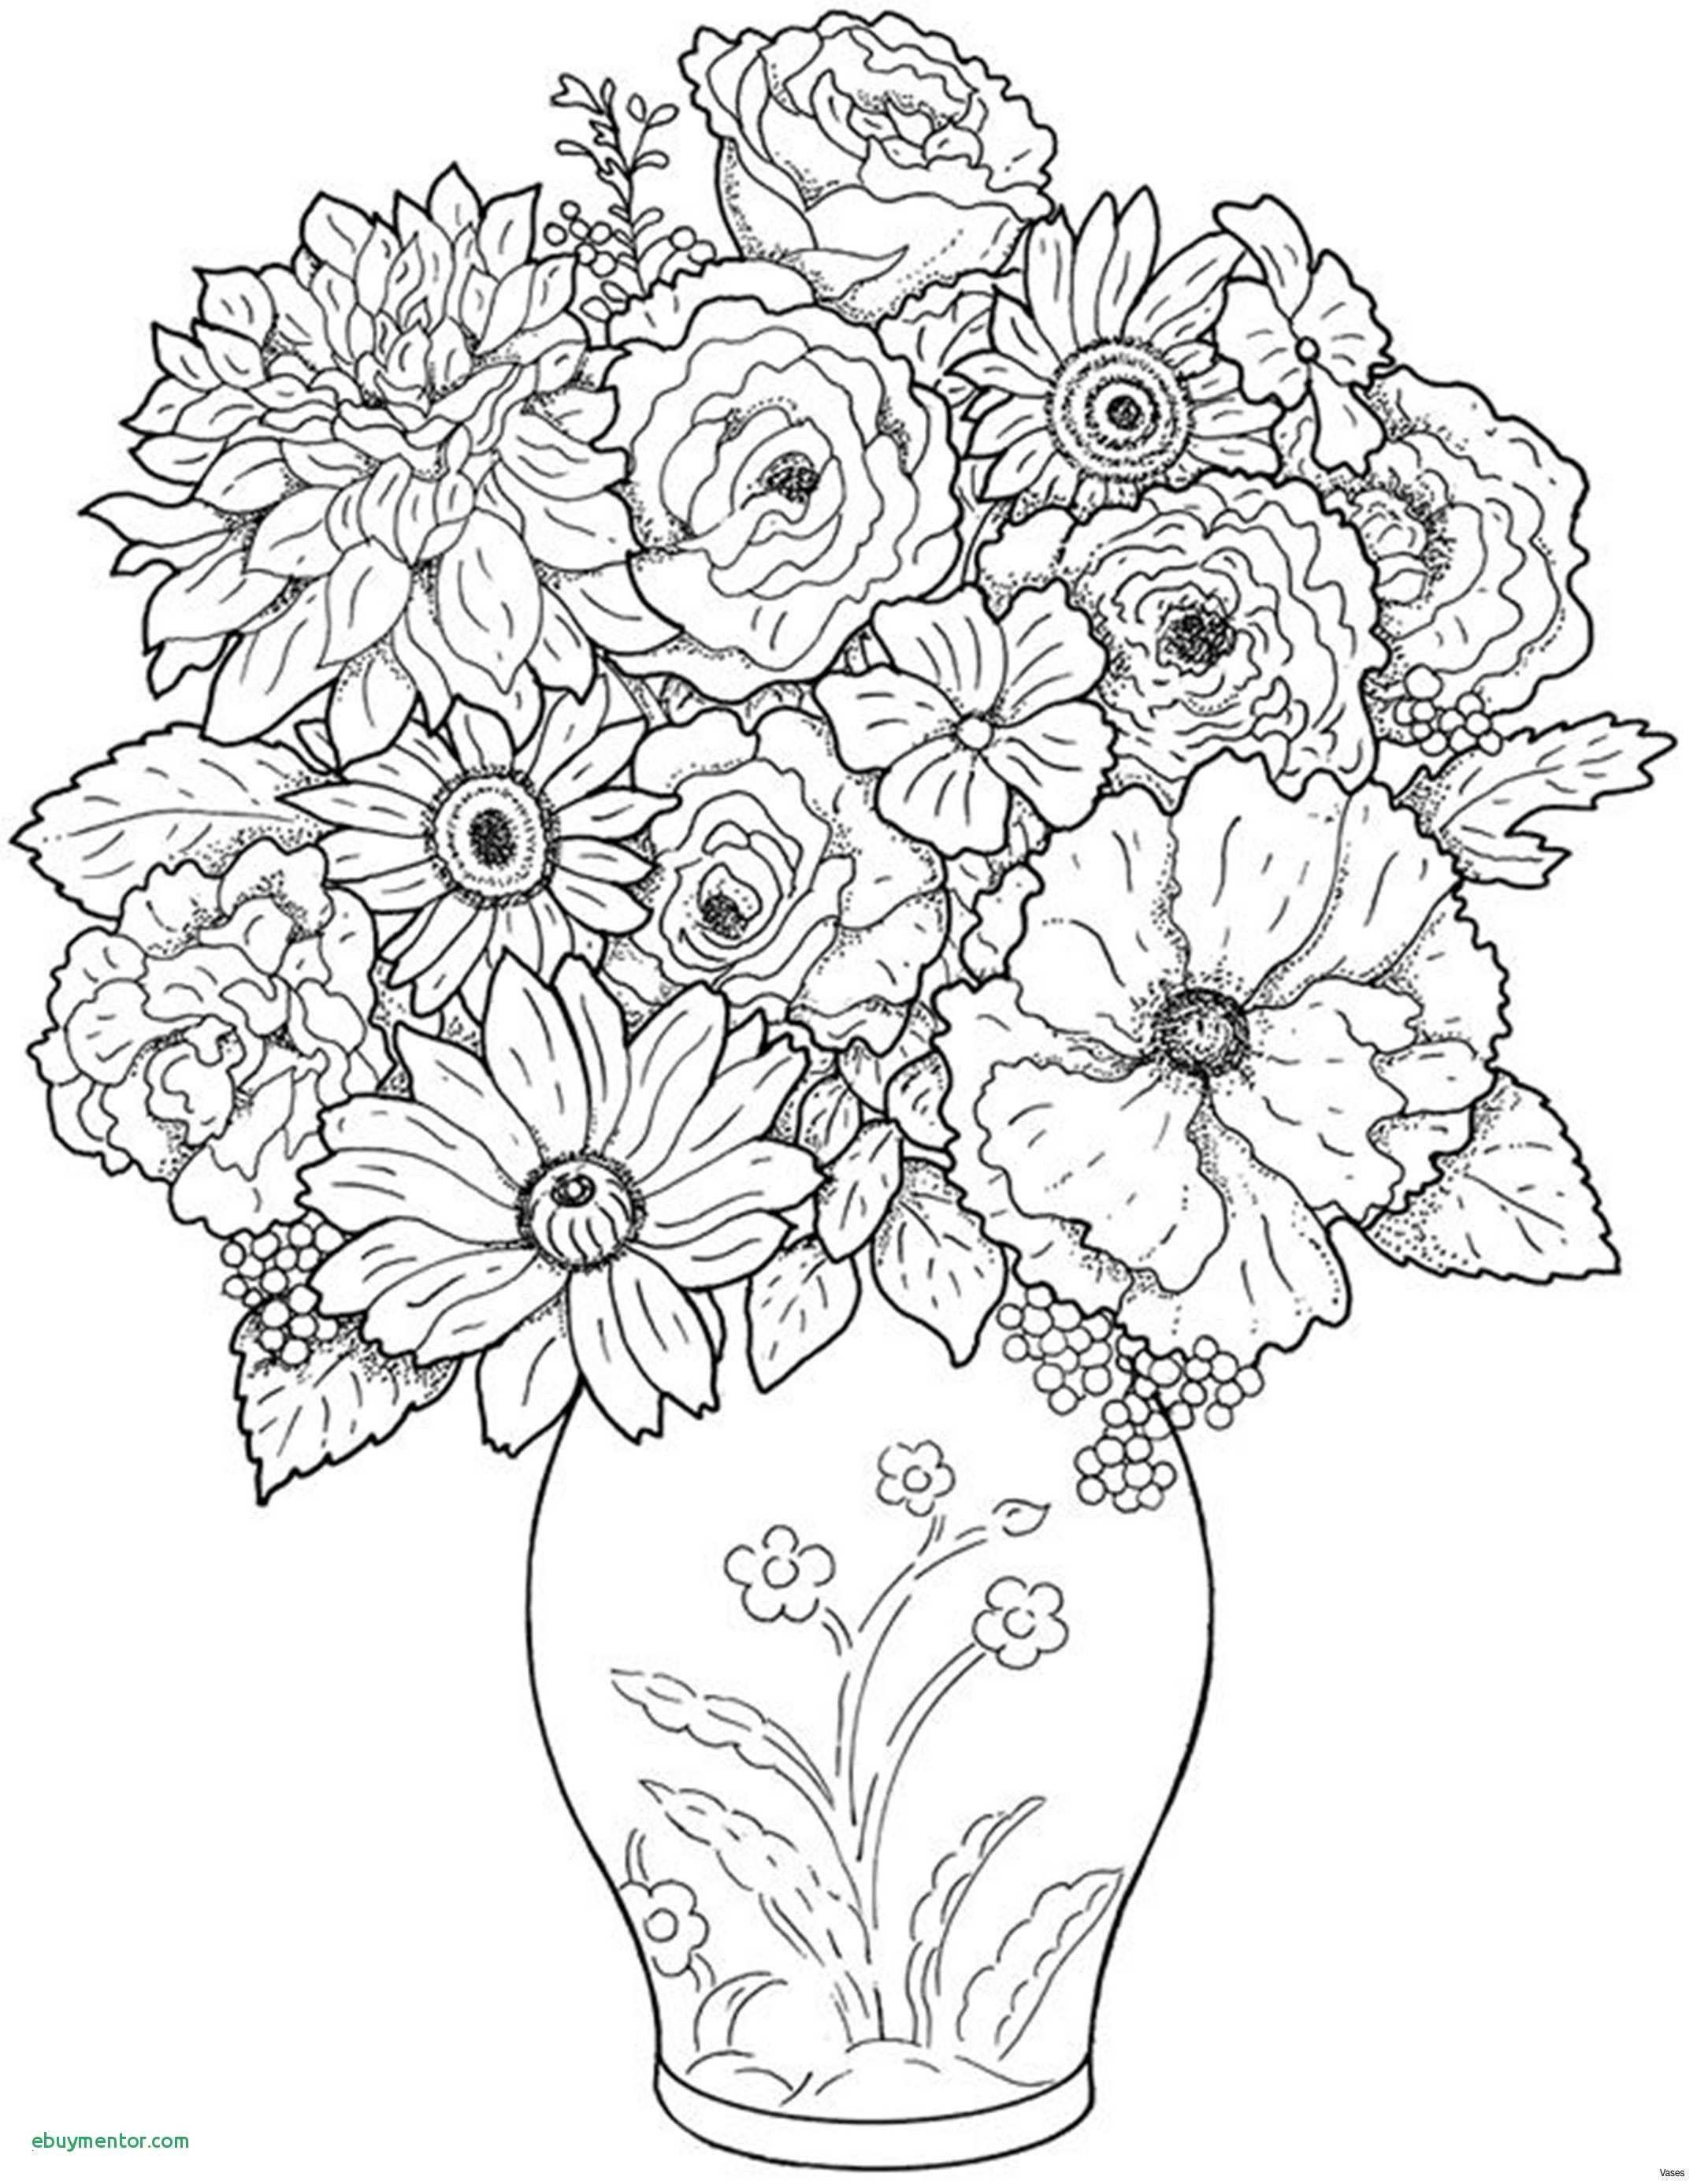 flowers in vase acrylic paintings of pictures of roses in a vase beautiful teen coloring best cool vases pertaining to pictures of roses in a vase beautiful teen coloring best cool vases flower vase coloring page